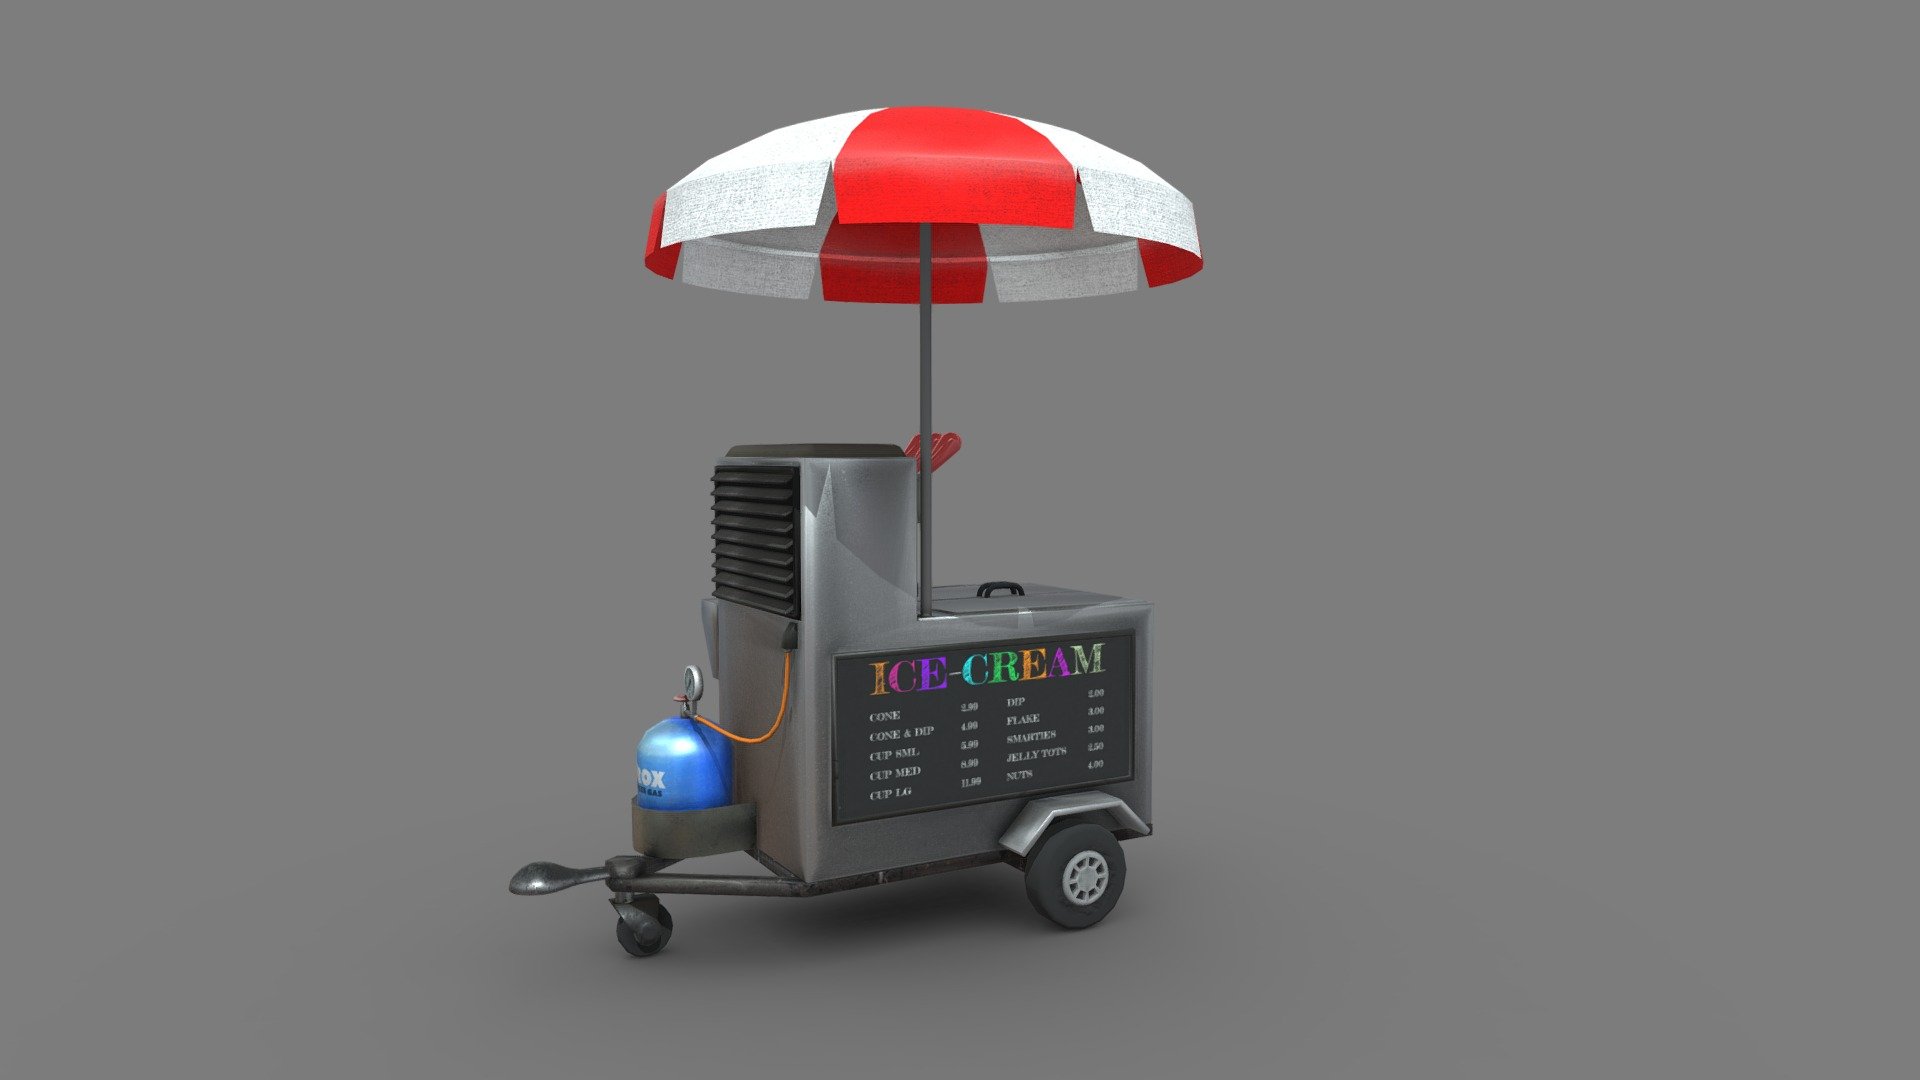 Food cart of ice cream – this model is part of our amusement park pack that you can fin in our profile 3d model